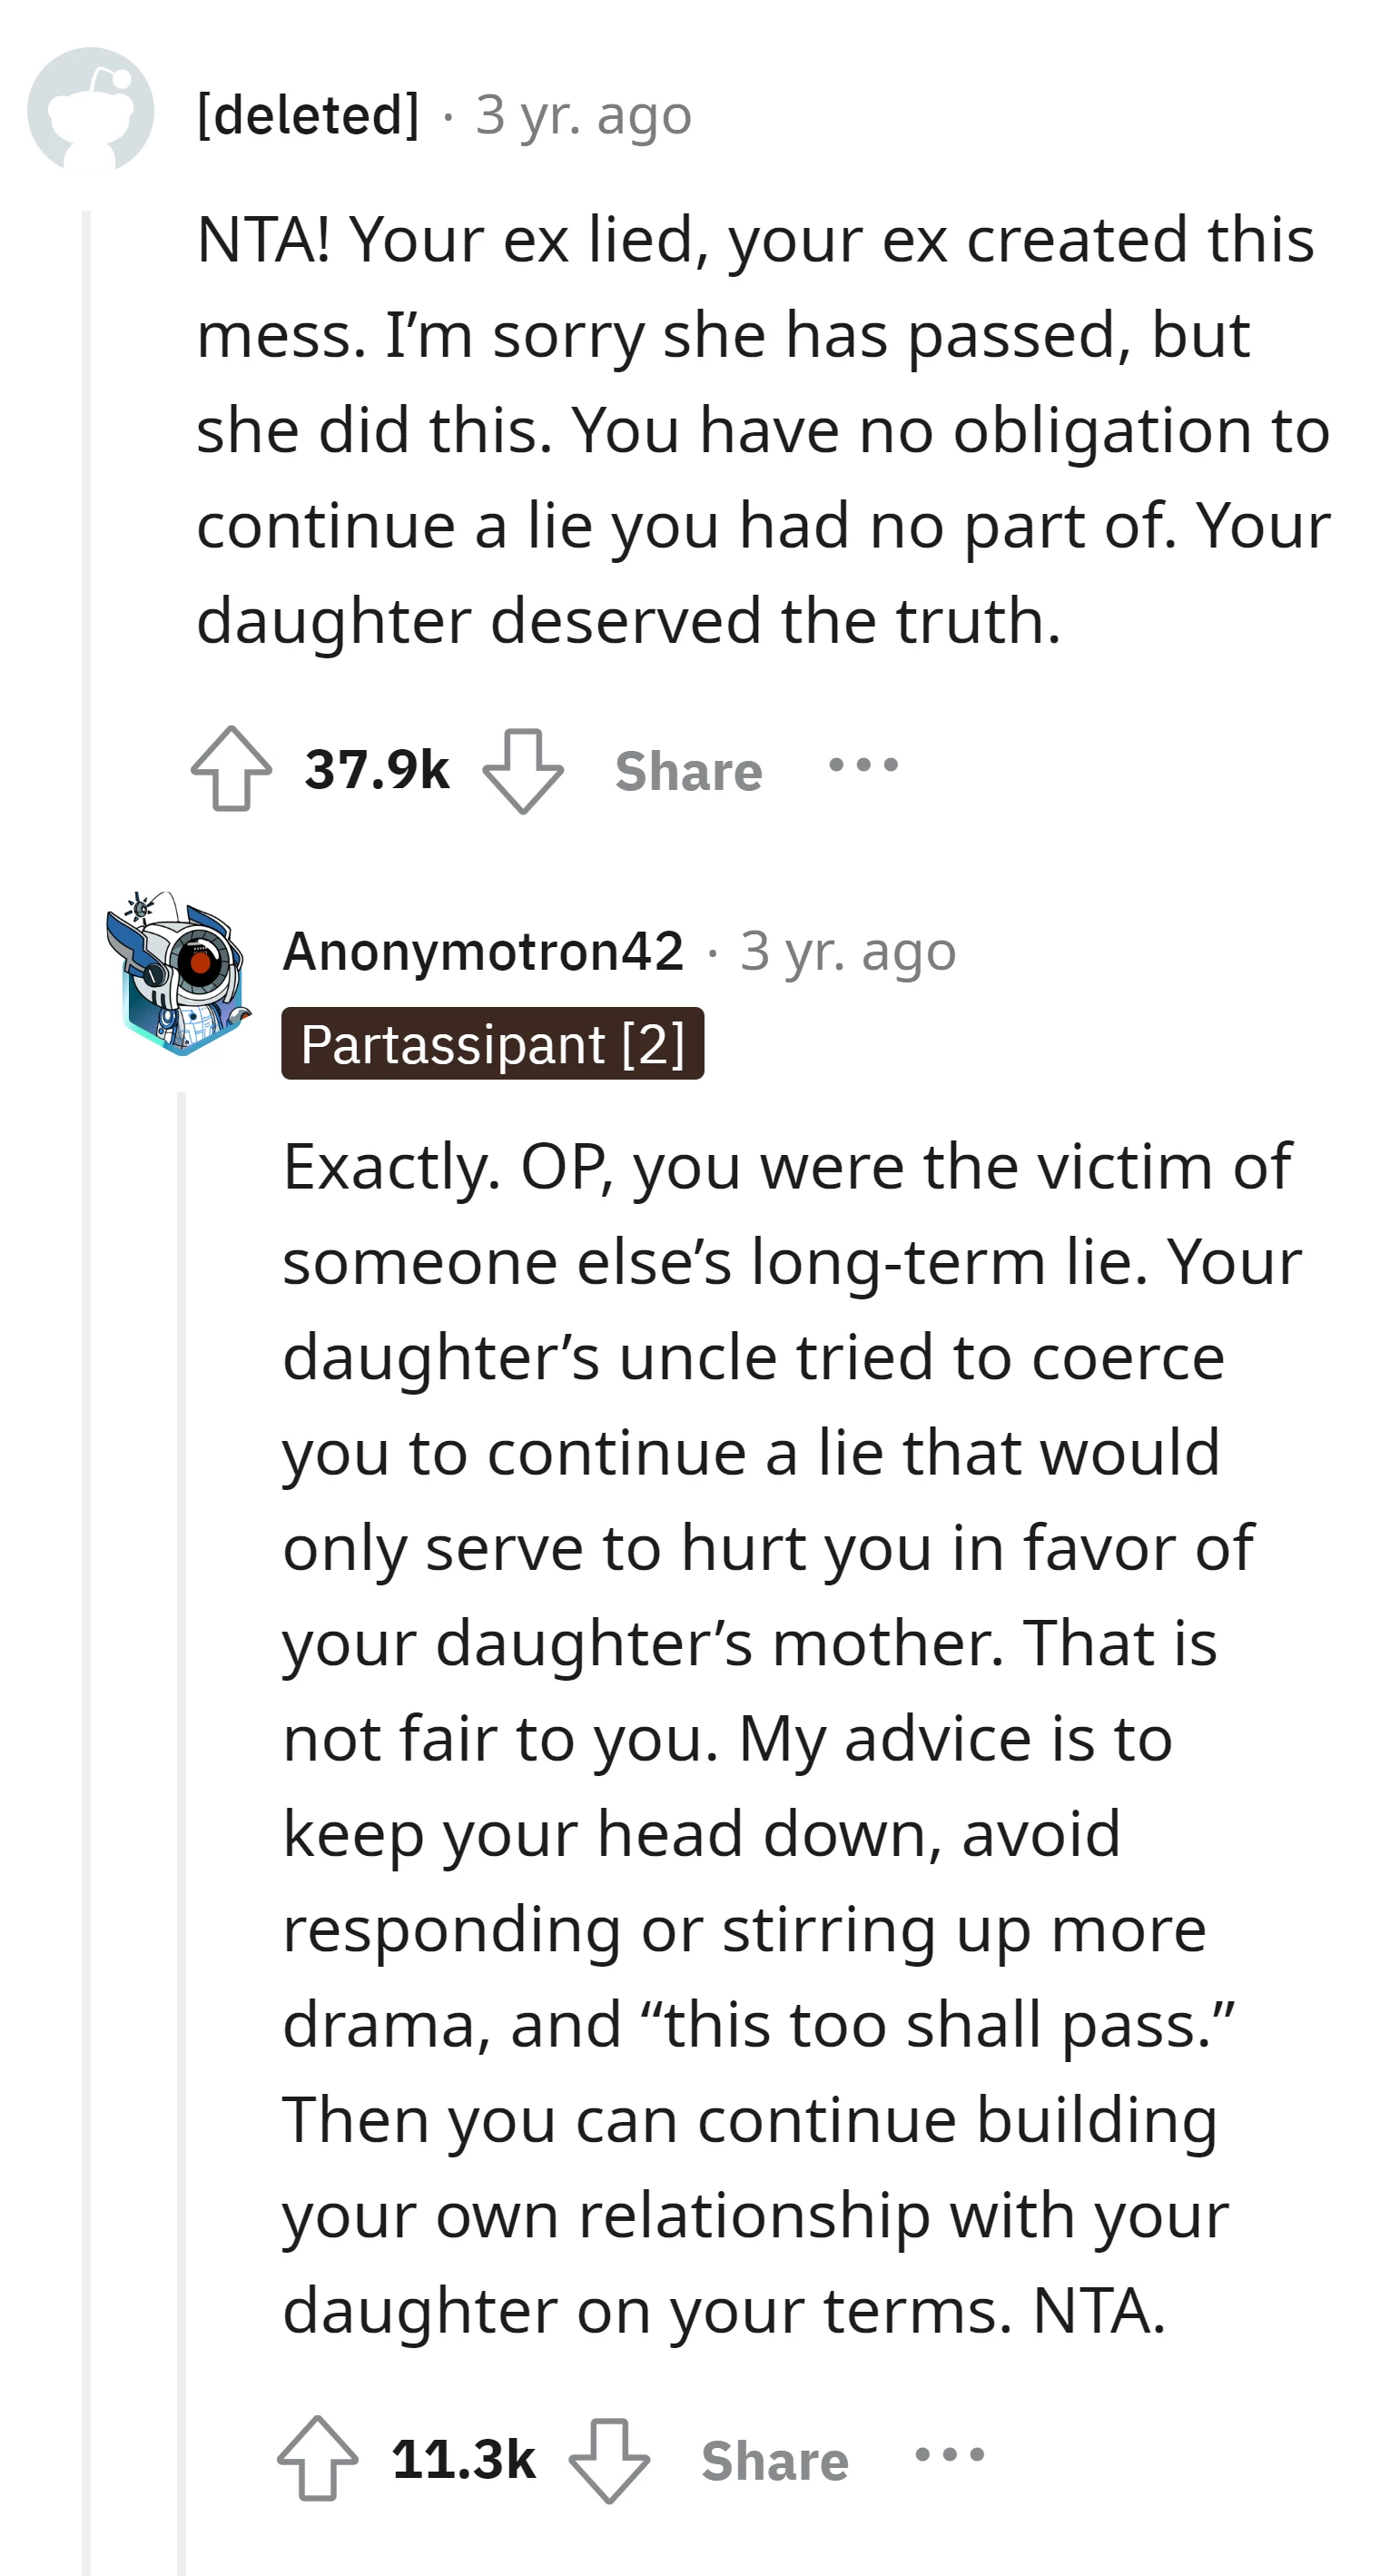 People commenting agree that the OP is not in the wrong for revealing the truth